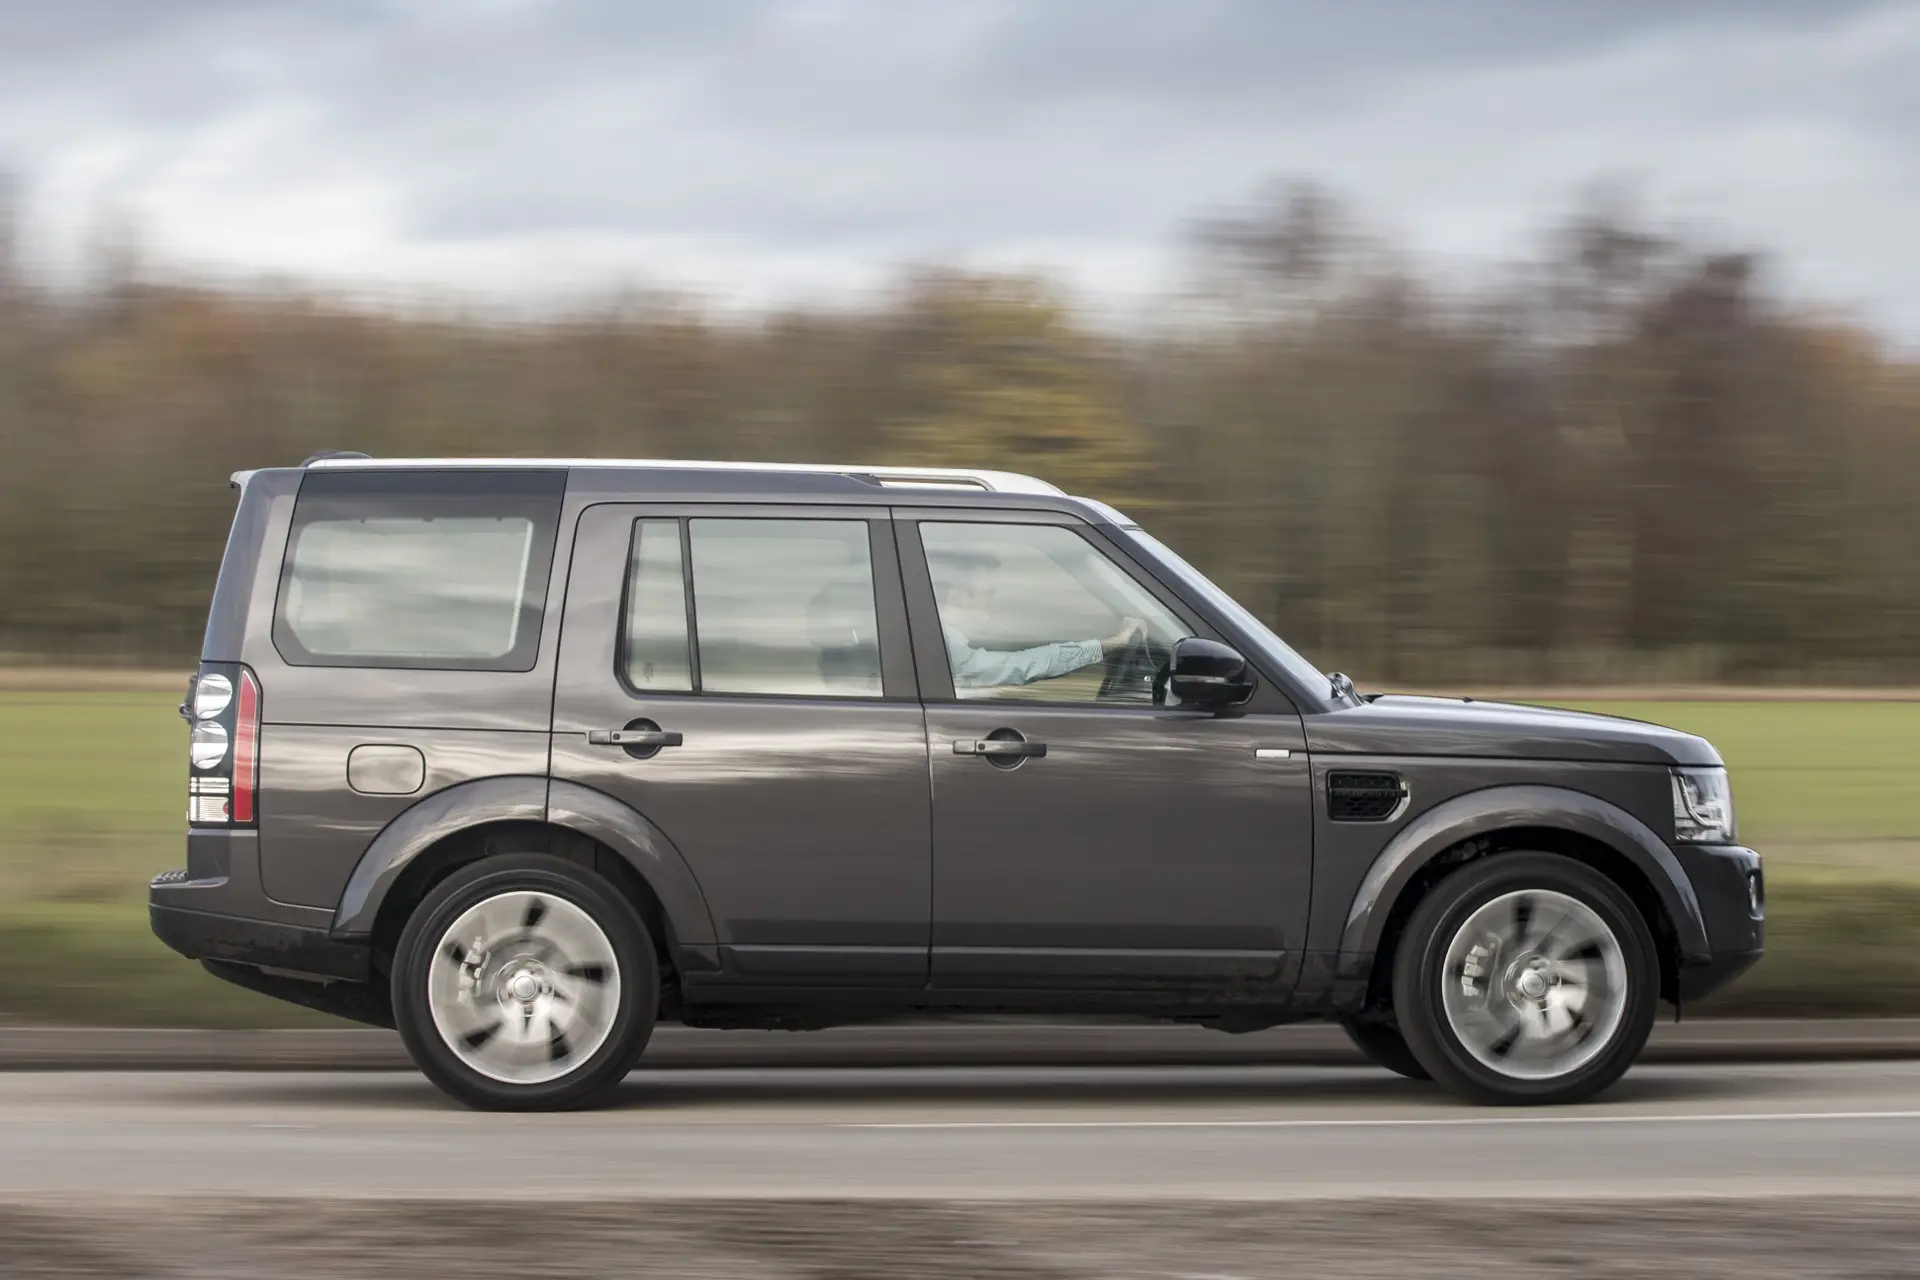 Land Rover Discovery 4 (2009-2017) Review: Exterior side photo of the Land Rover Discovery 4 on the road